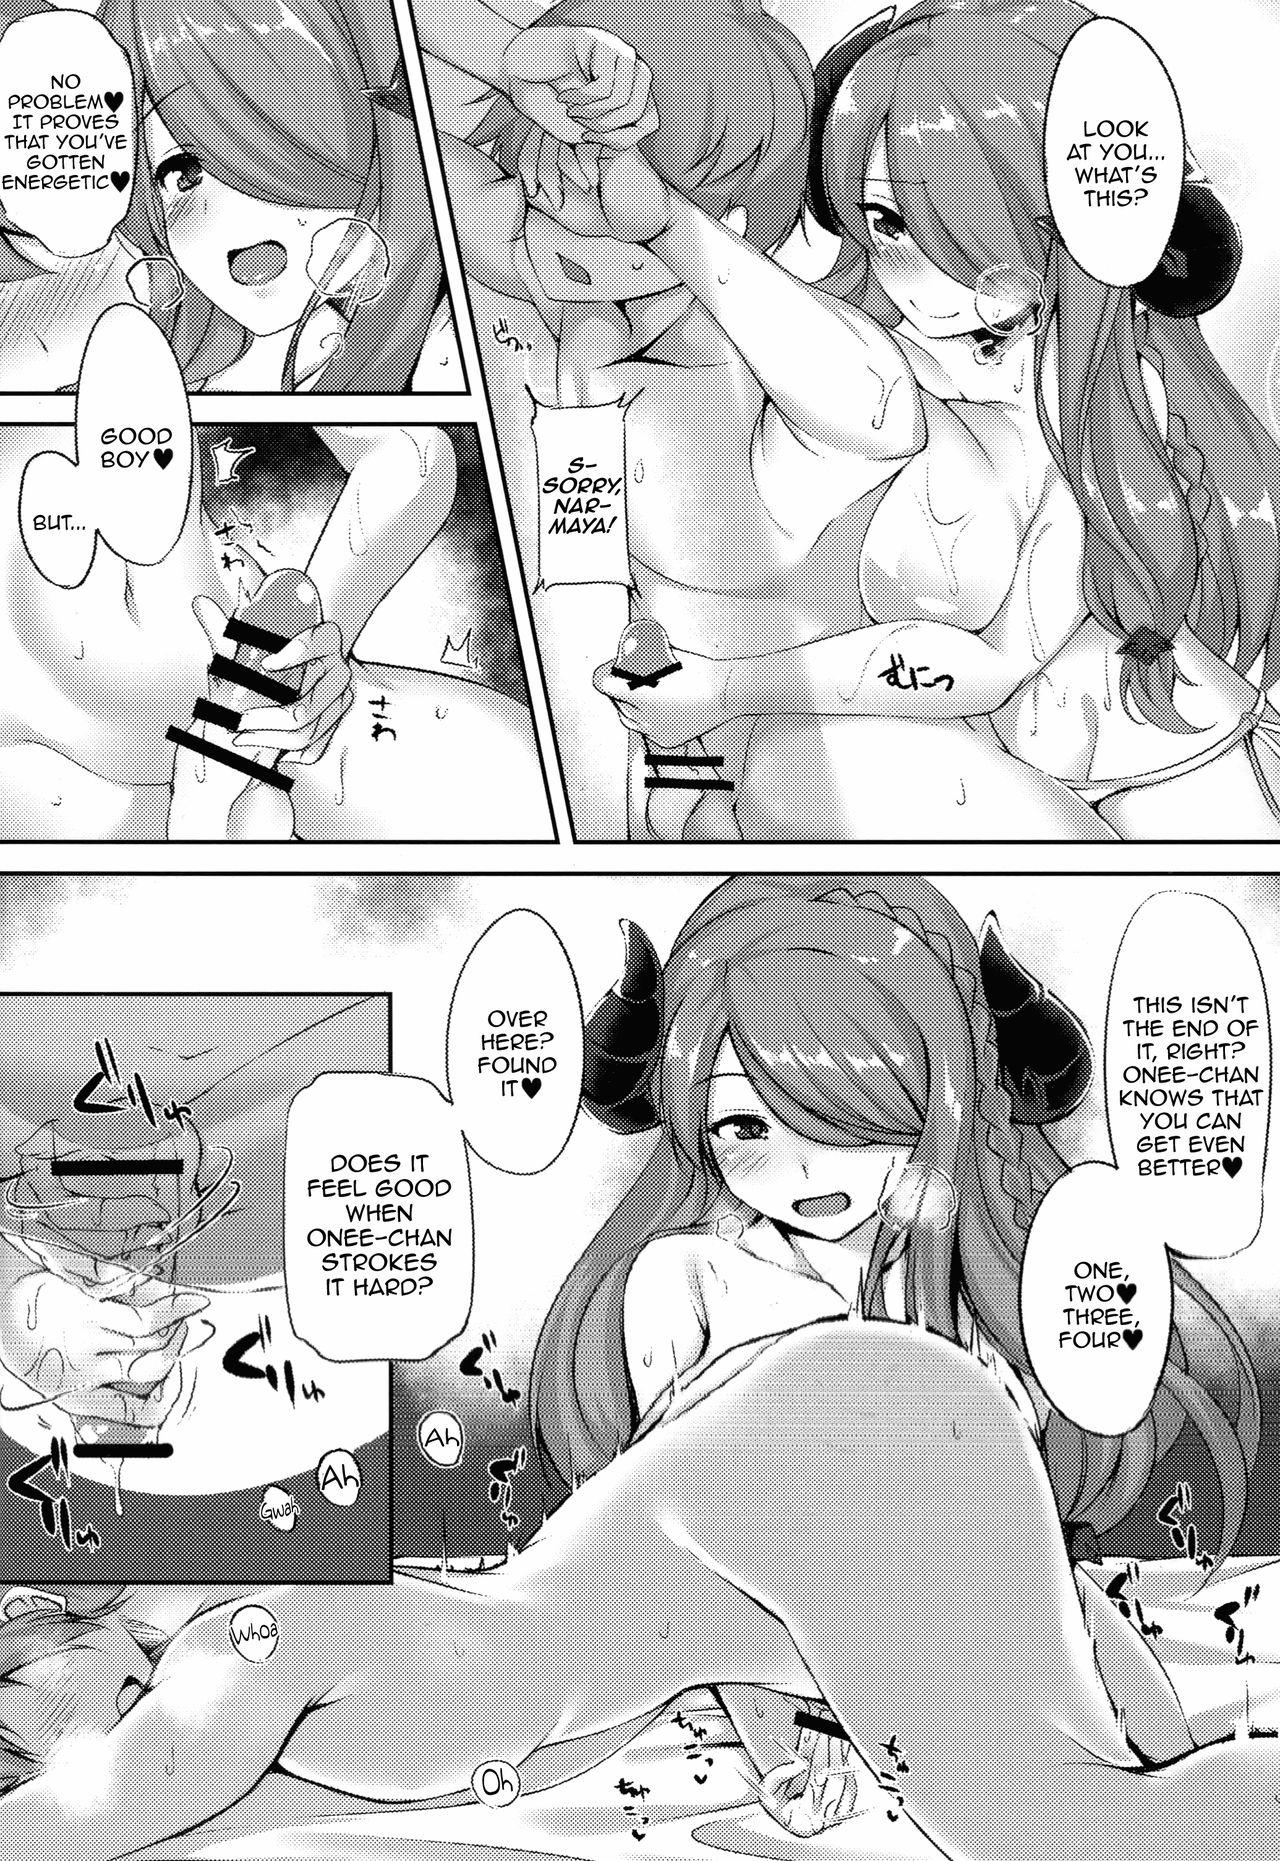 (C94) [BENIKURAGE (circussion)] Captain-chan! You Look so Tired Today, How About a Special Massage From Onee-san? (Granblue Fantasy) [English] [Aoitenshi] 8